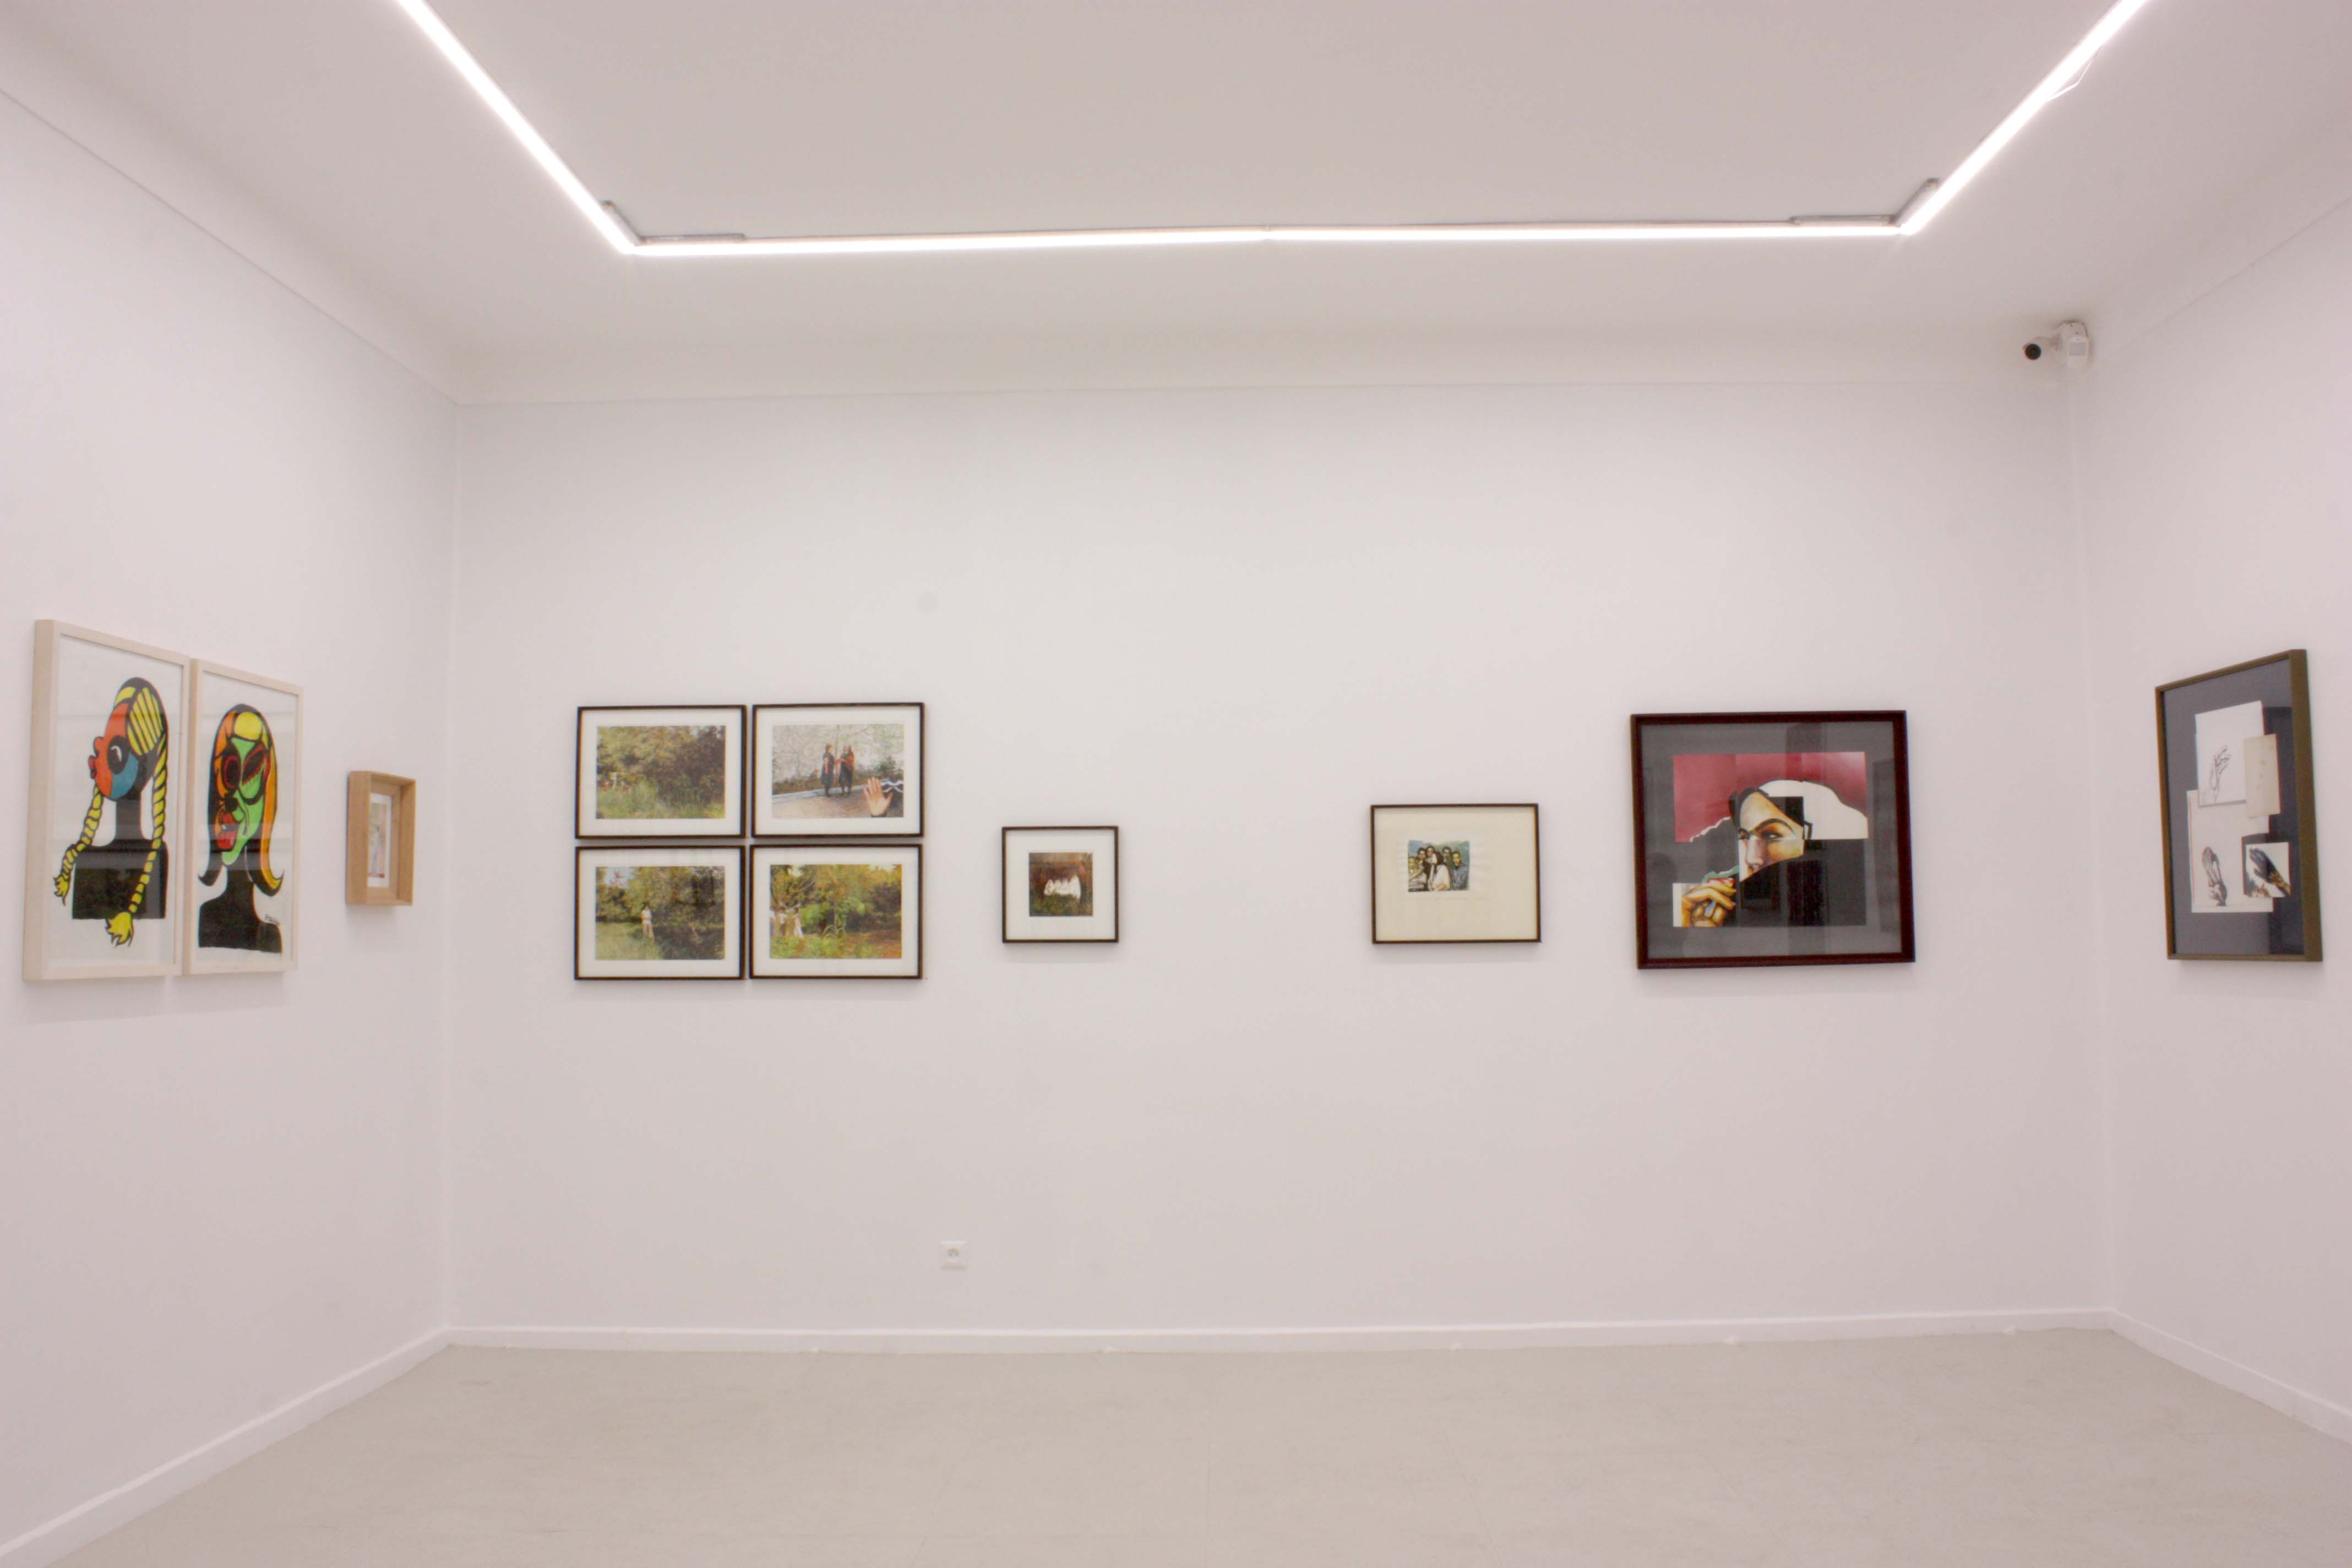 Installation view.Approaching The End Of Magic, The Plateau Closes in